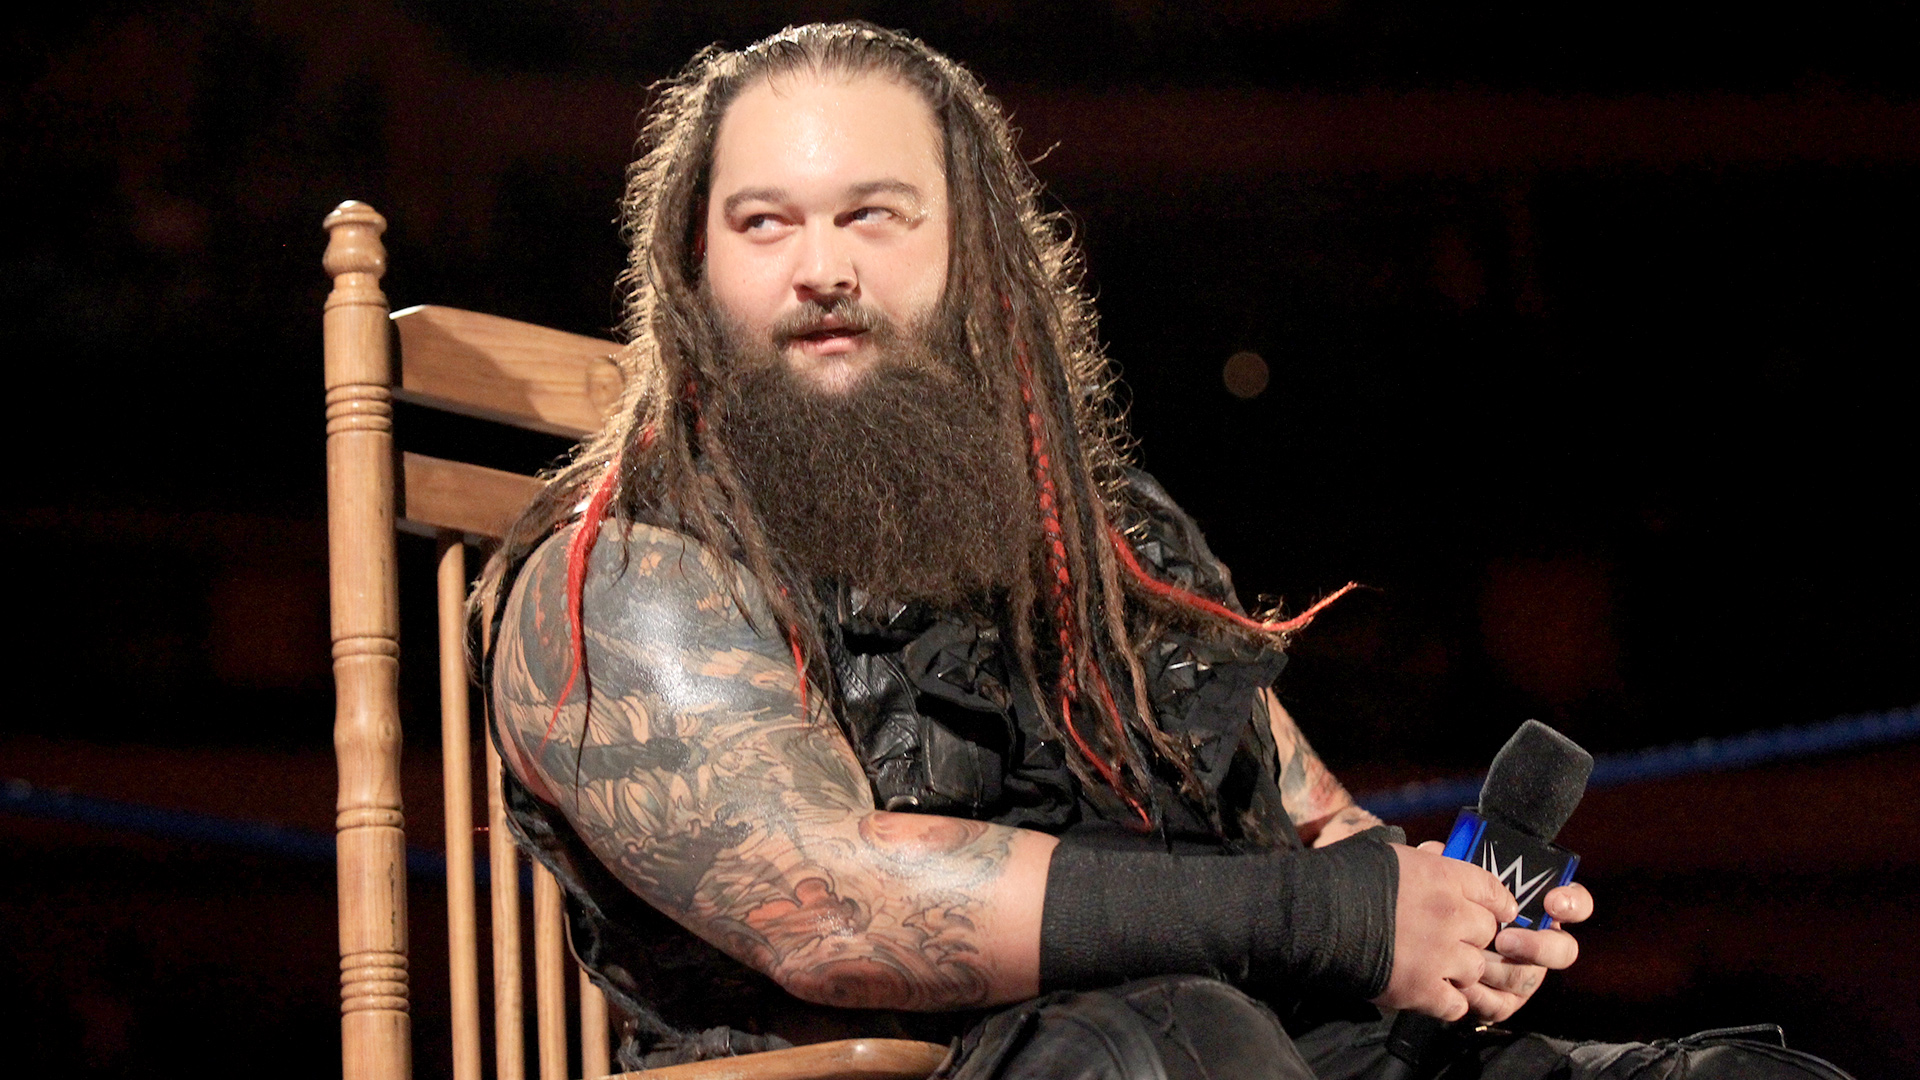 What If Bray Wyatt Doesn't Win The Elimination Chamber?